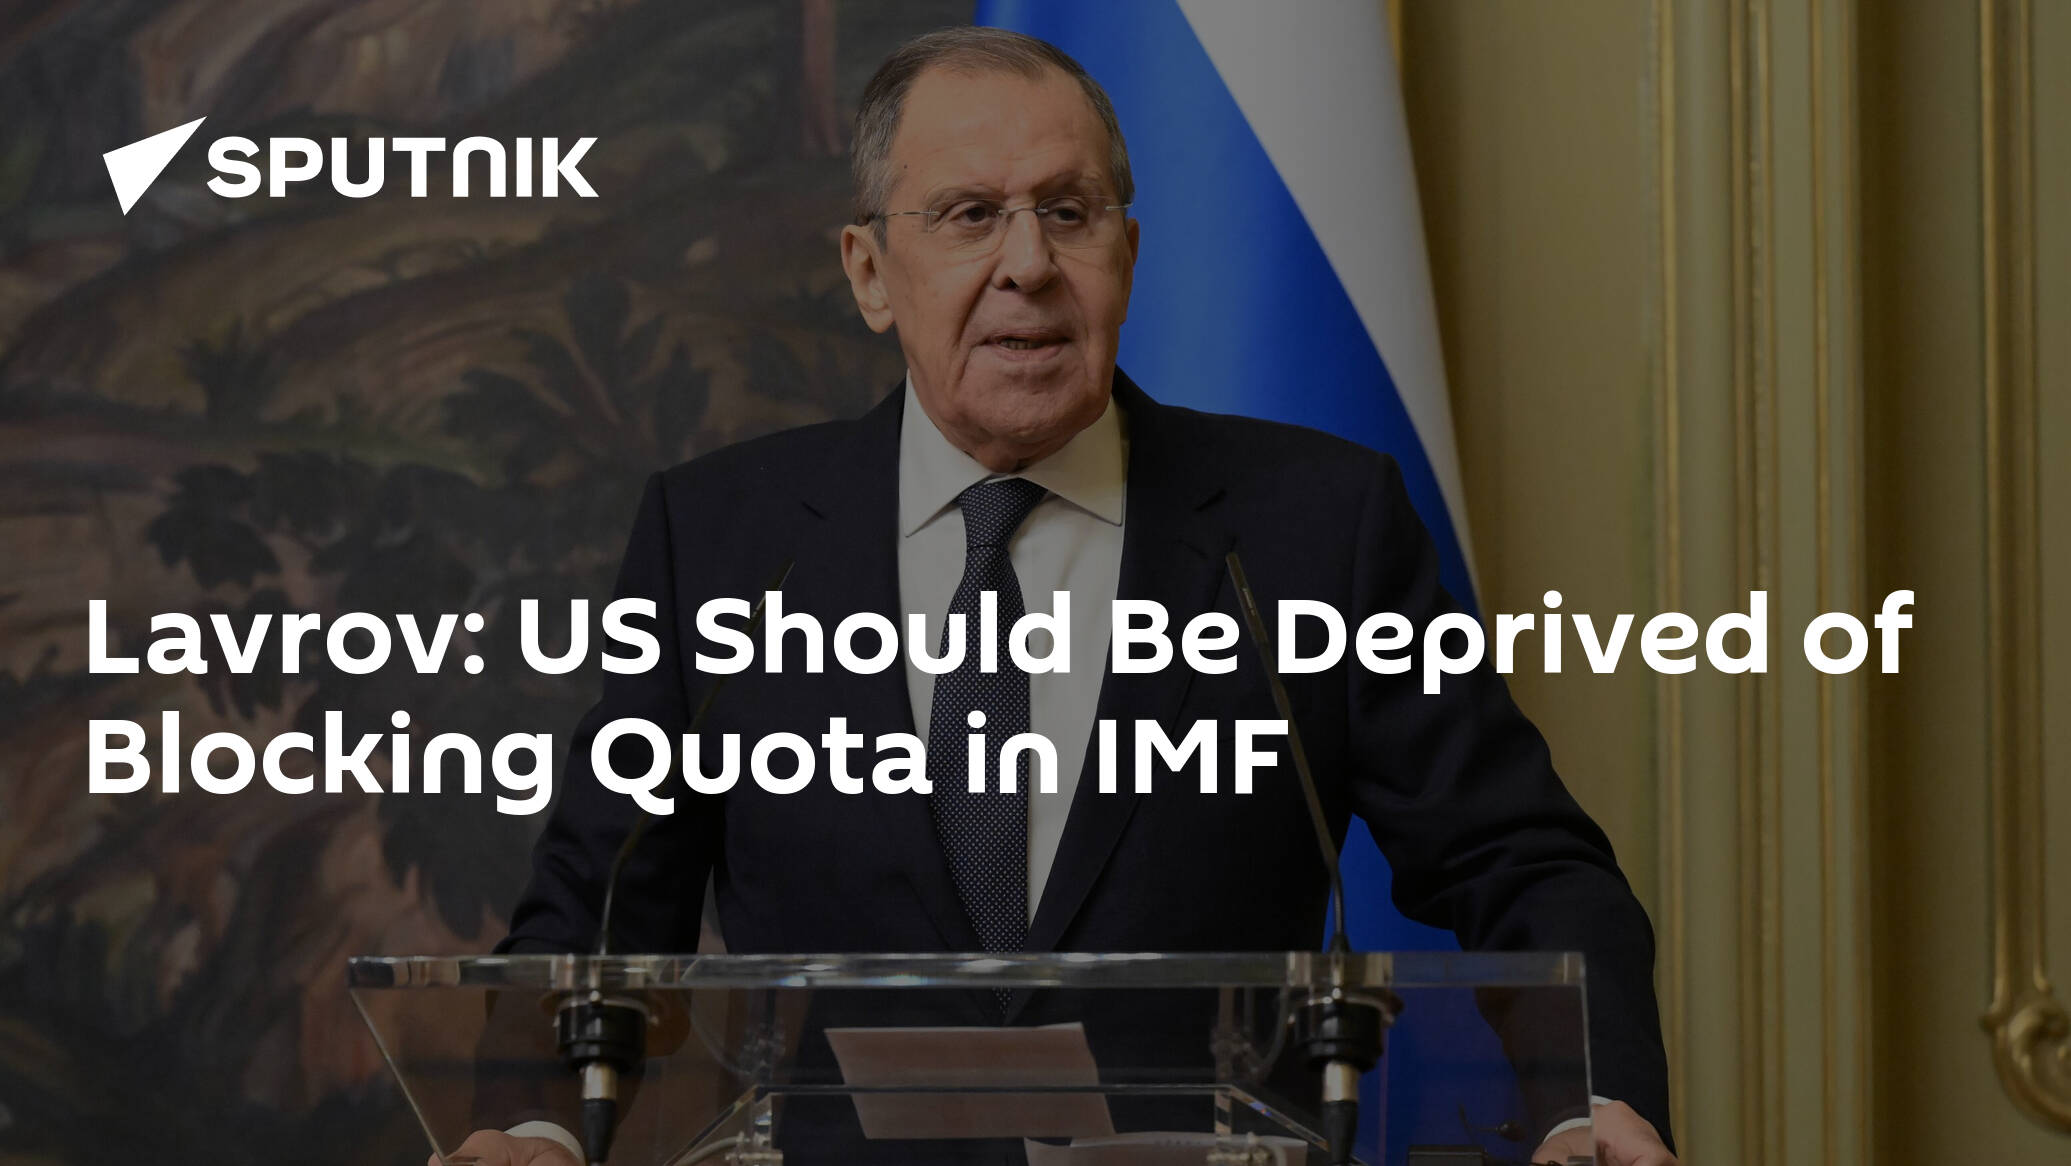 Lavrov: US Should Be Deprived of Blocking Quota in IMF